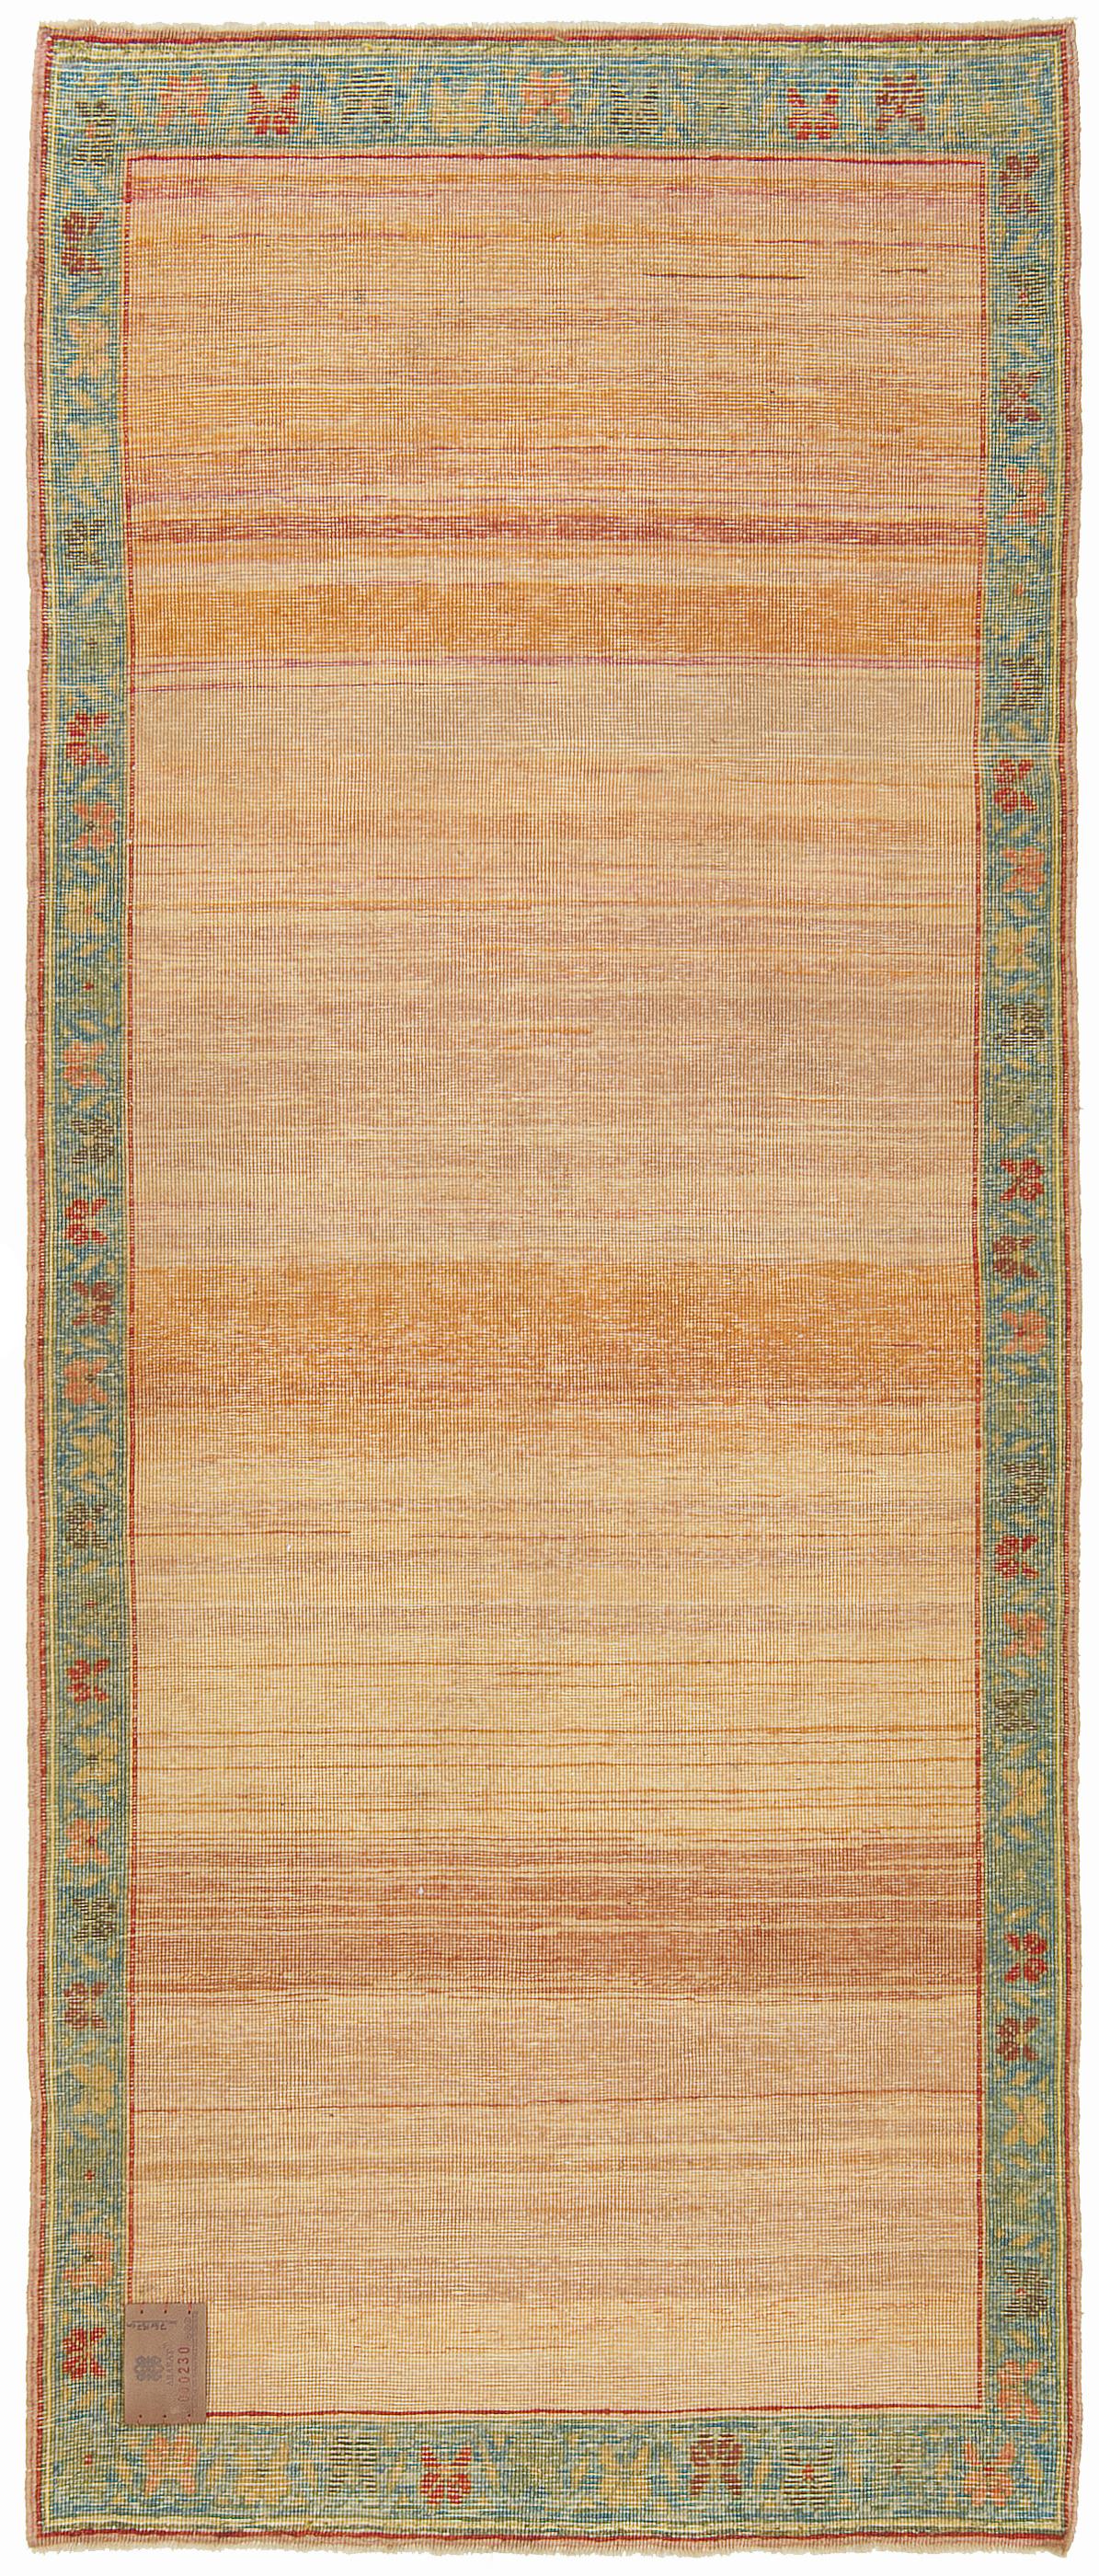 This unique design rug is interpreted by our designers with a mixture of Ararat Rugs’ soft tone natural dyed hand-spun yarns.
This modern carpet is looking like the sand in the desert.

Color summary: 10 colors in total, most used 4 colors